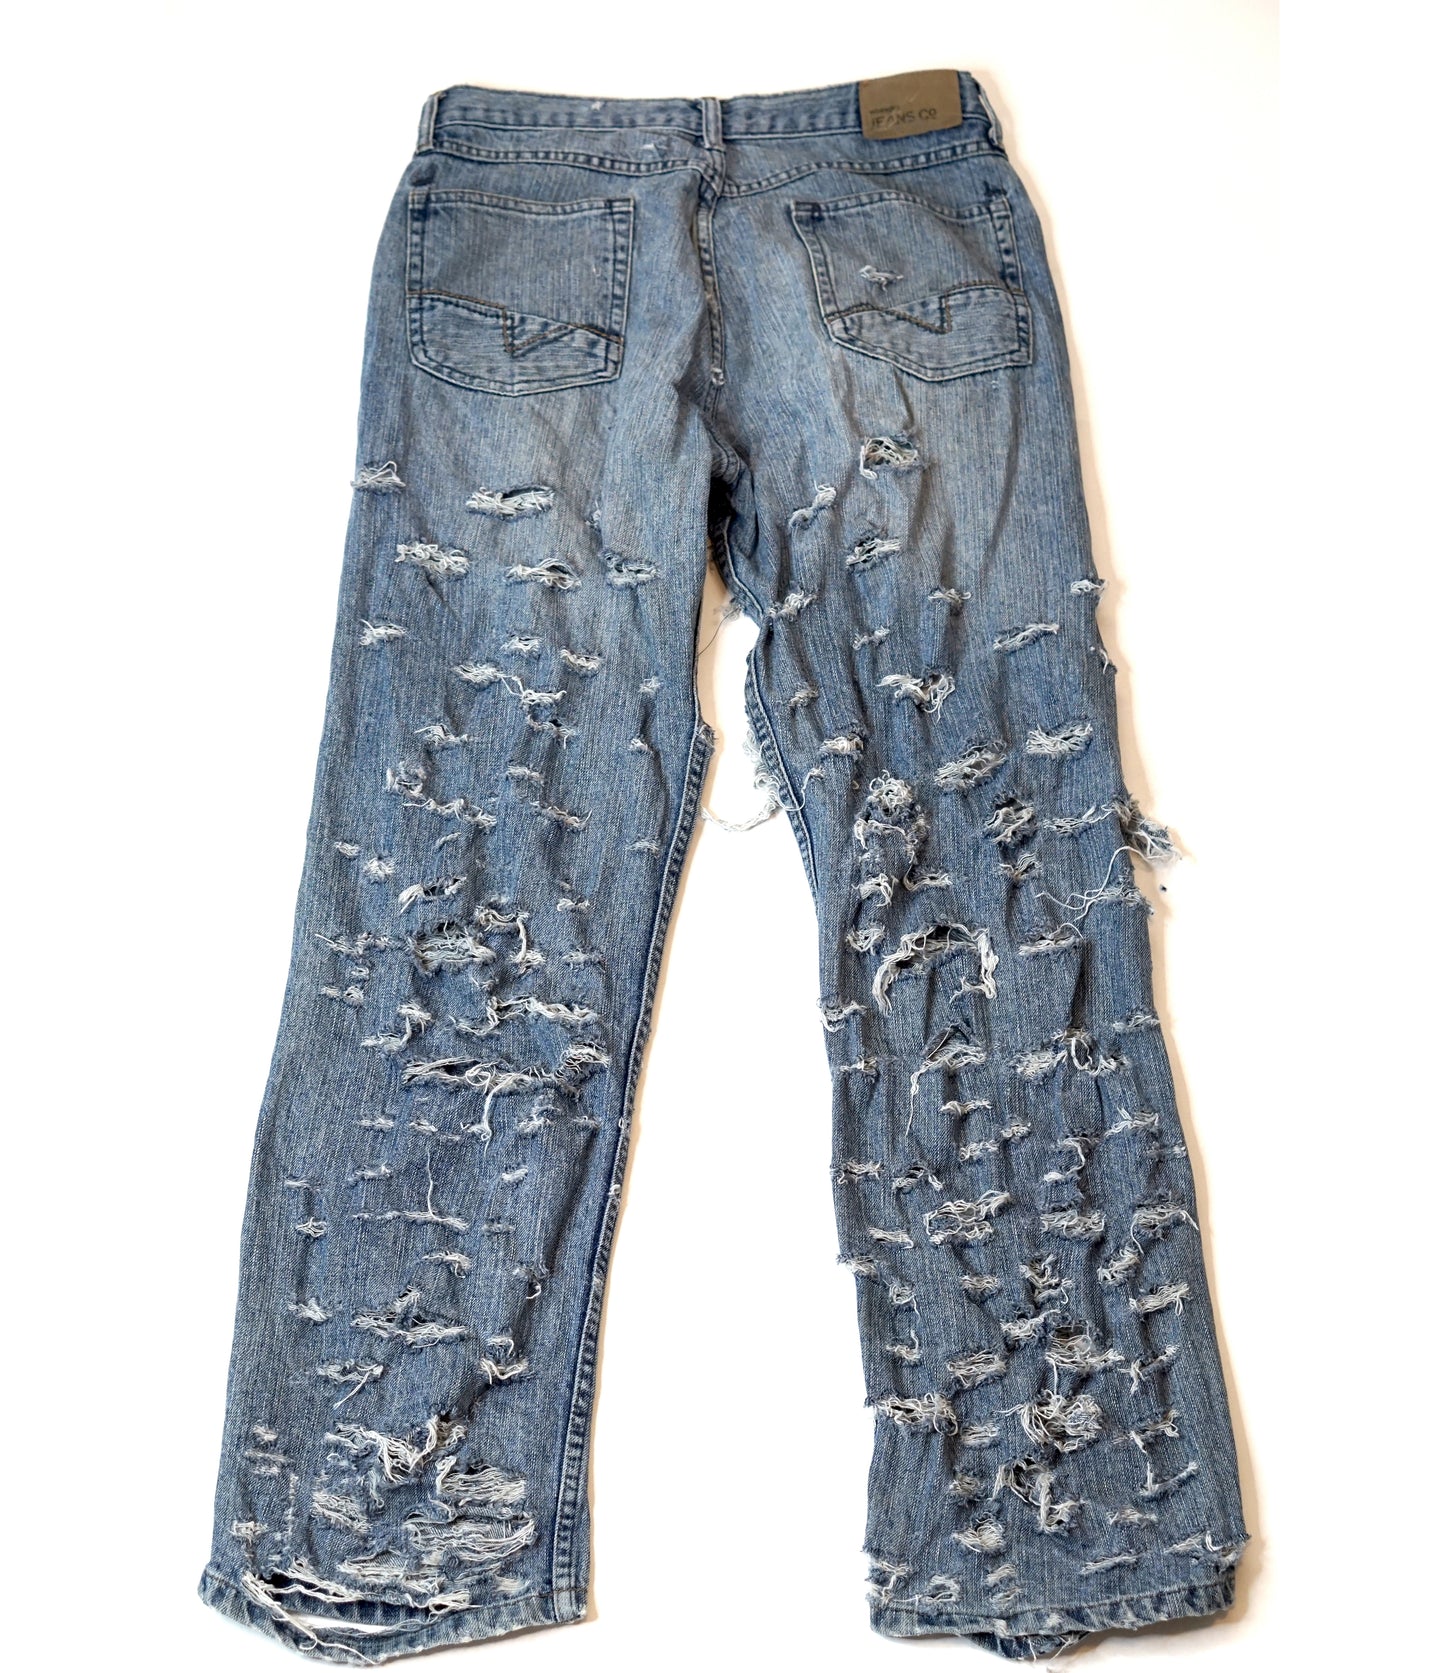 The Oracles Ancient Jeans